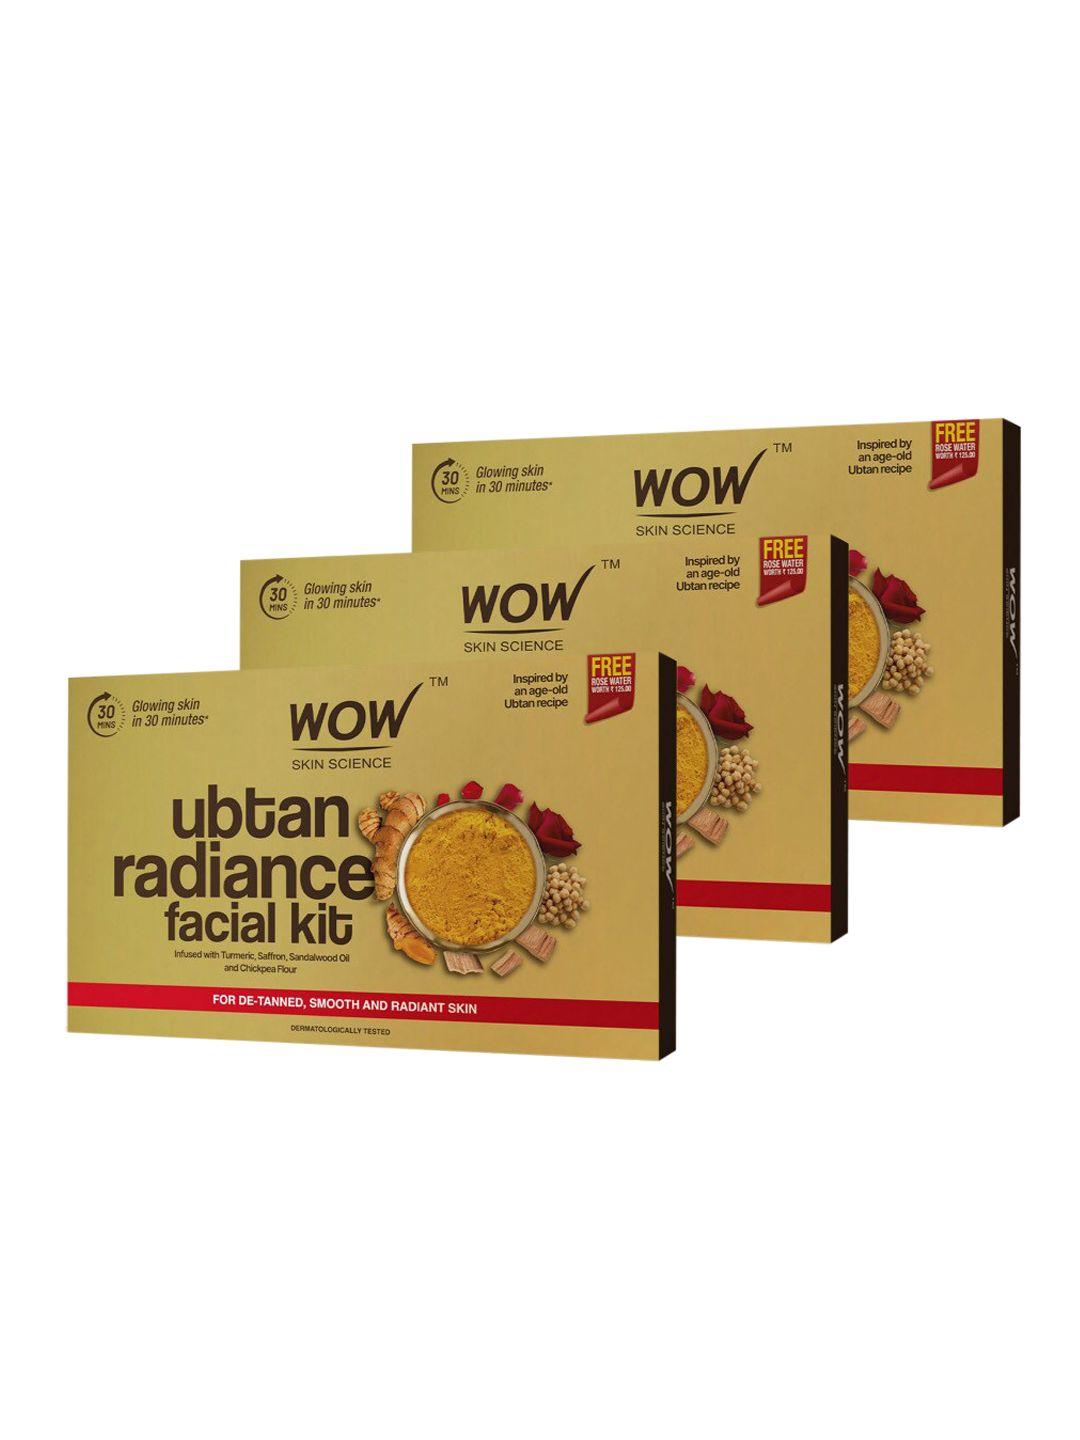 wow-skin-science-pack-of-3-ubtan-radiance-facial-kit-for-glowing-skin-with-free-rose-water